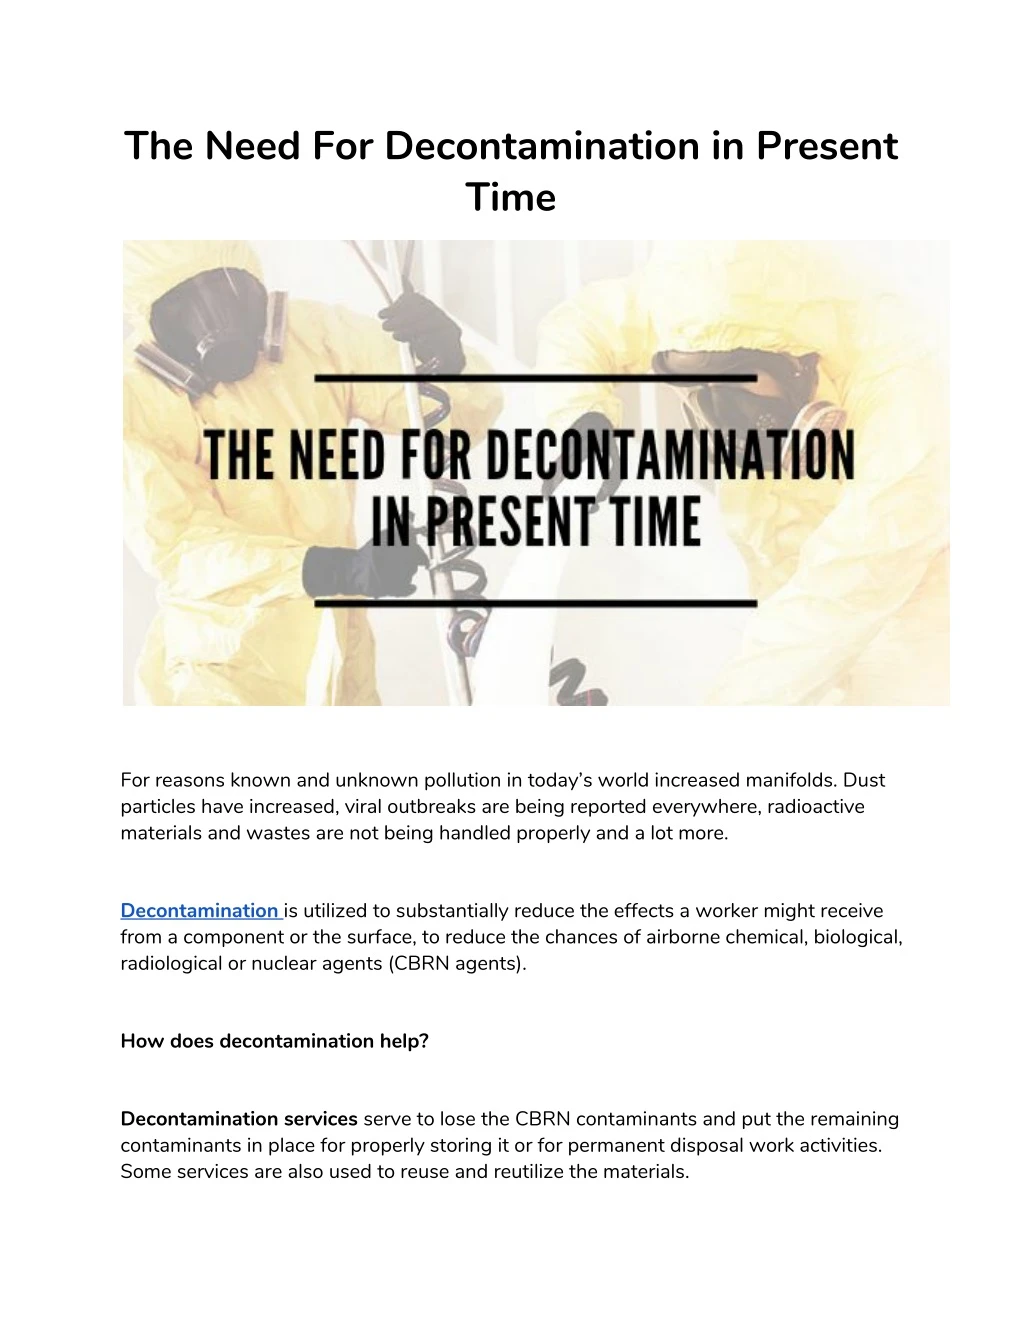 the need for decontamination in present time